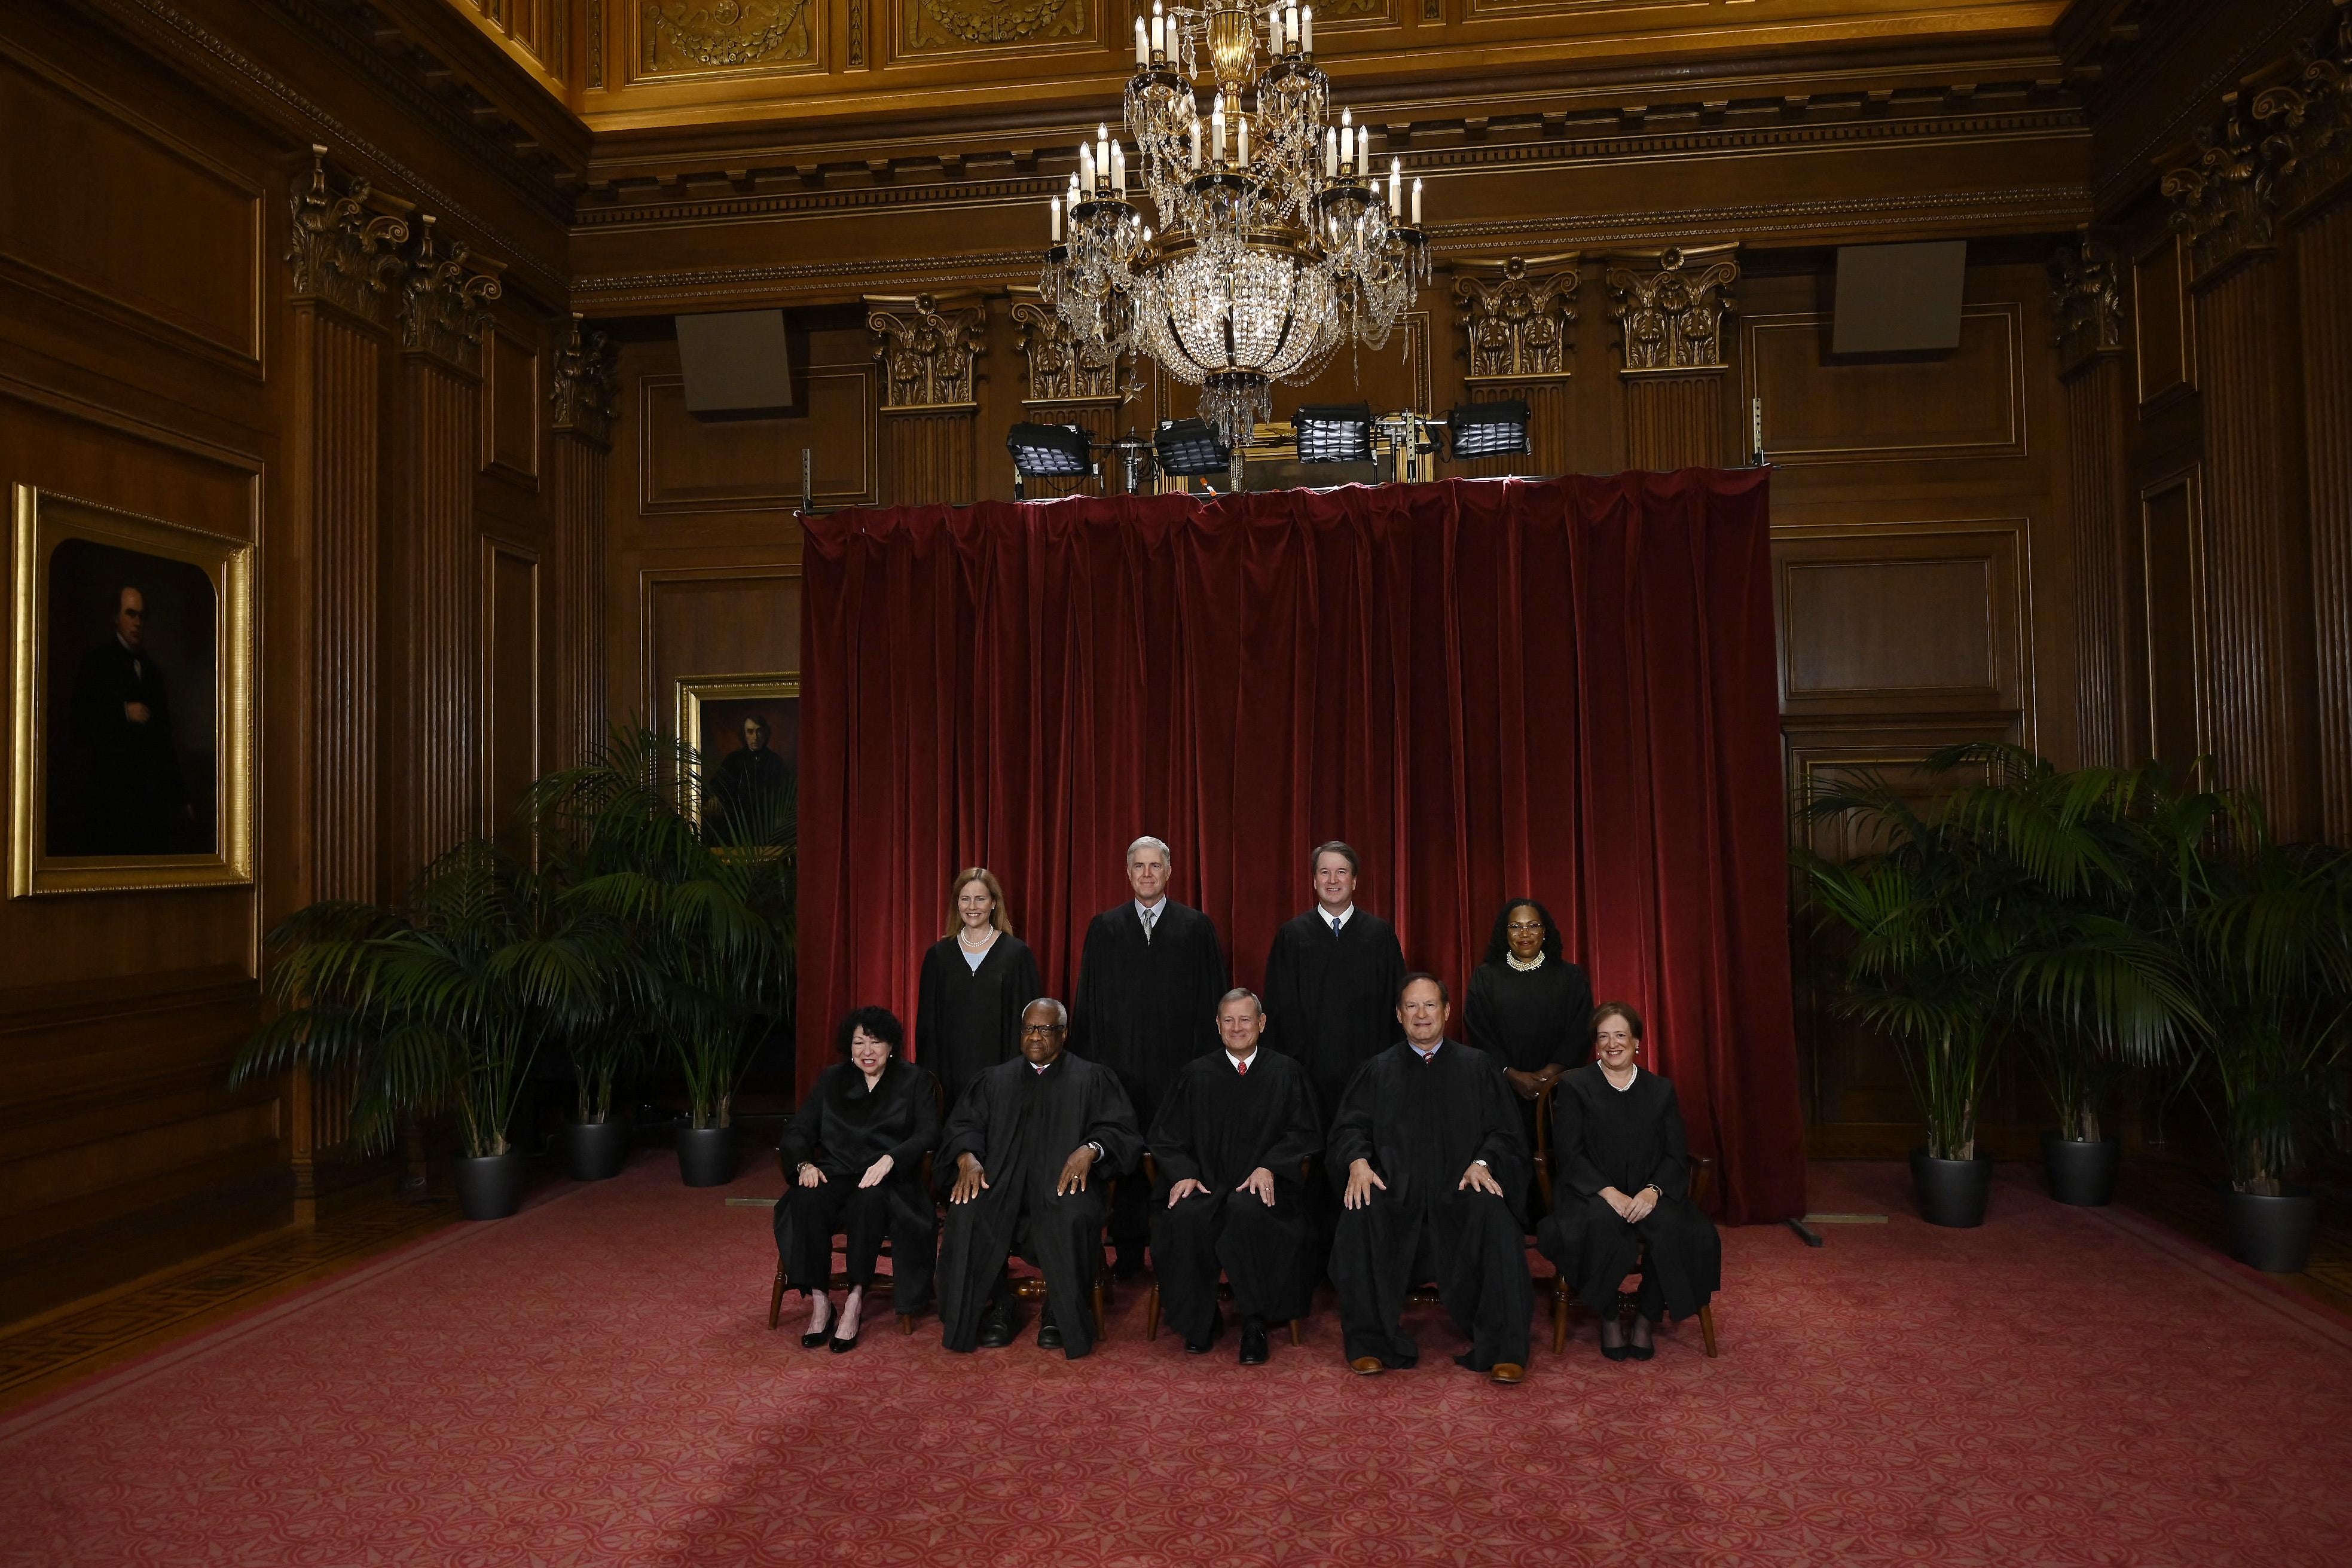 The Supreme Court poses for its official photo. This photo is further back, and you can see the justices in front of a red curtain, with the fancy room of the court surrounding them.